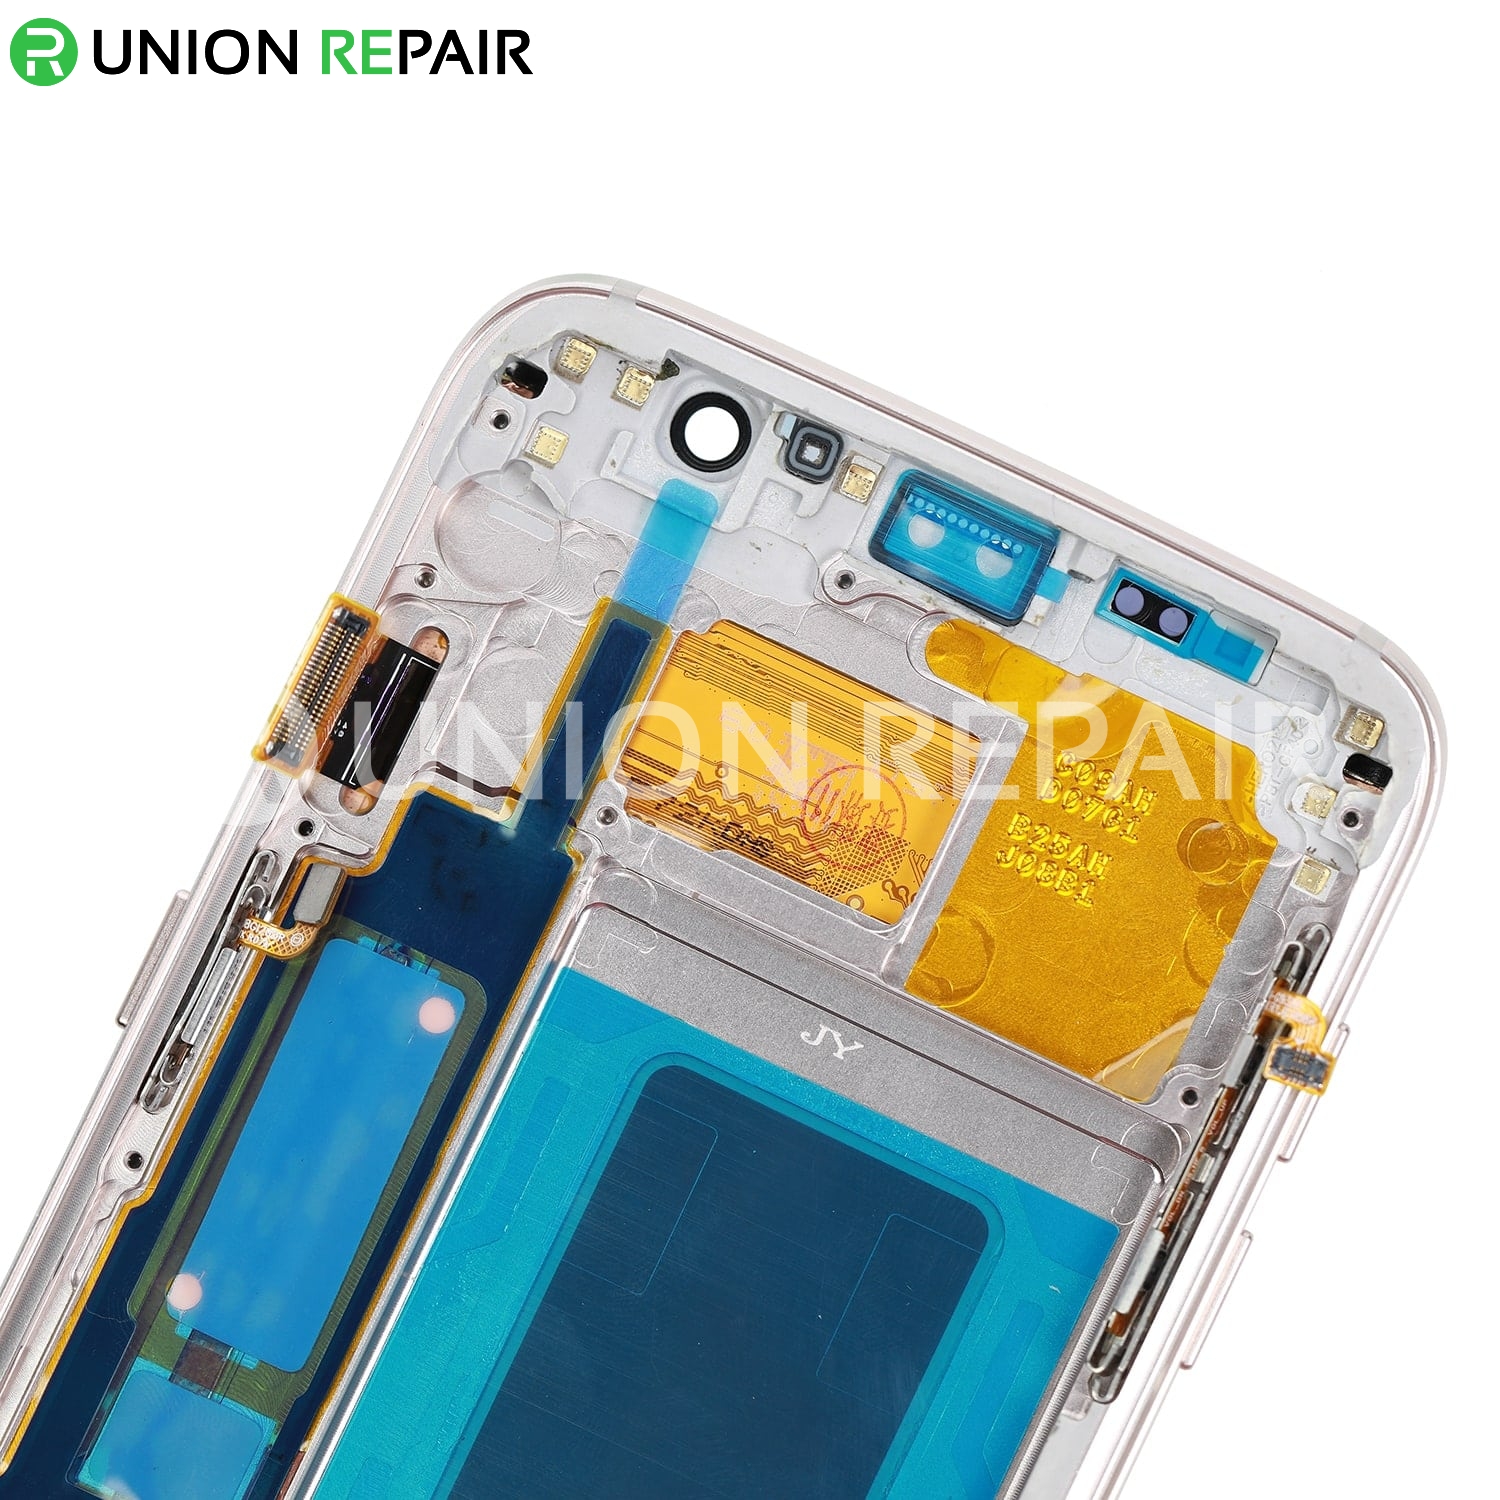 Replacement for Samsung Galaxy S7 Edge SM-G935 Series LCD Screen and Digitizer Assembly with Frame - Sapphire